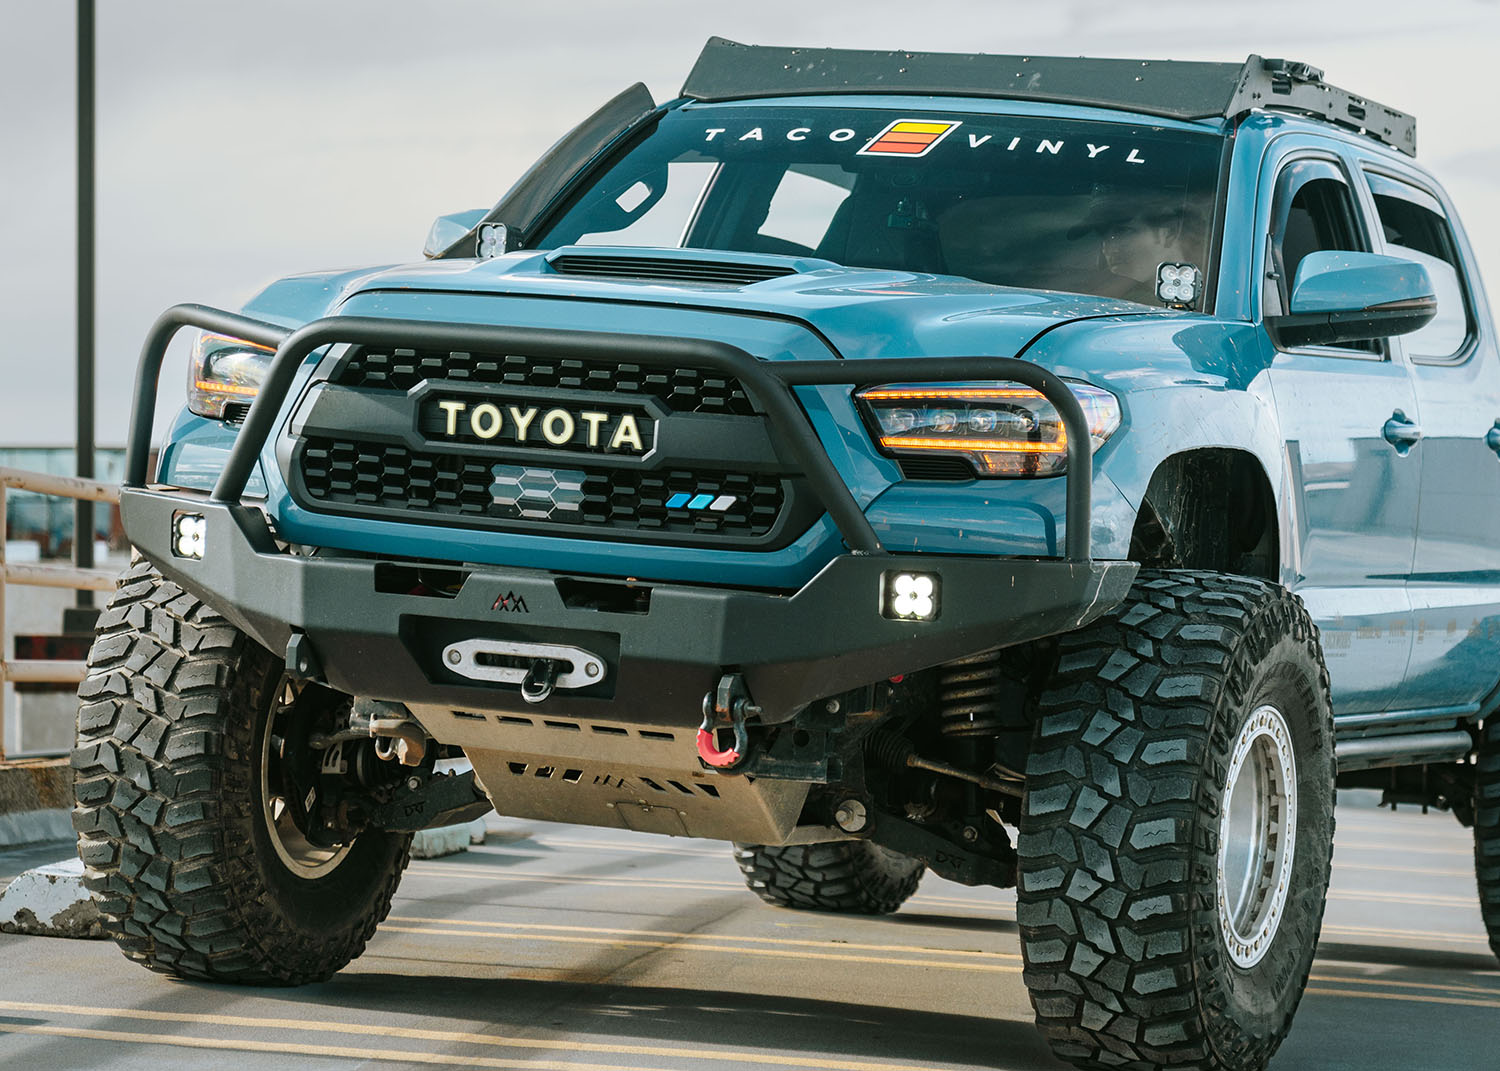 Toyota Tacoma Expedition Bundle Deal